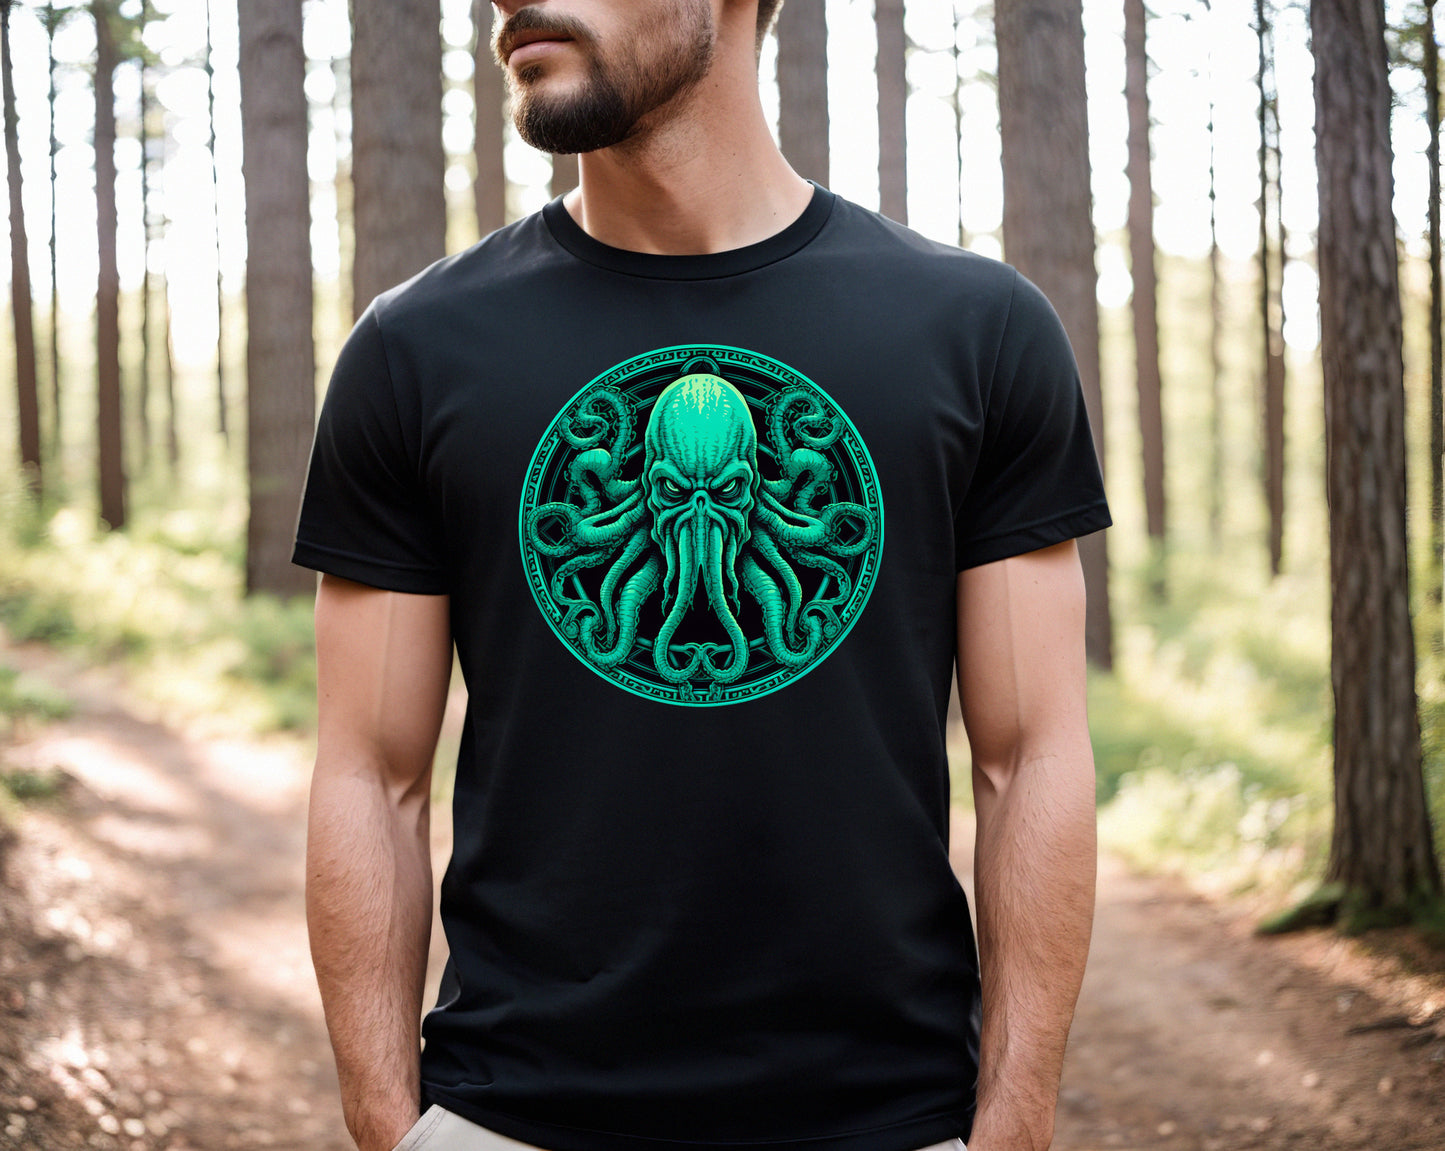 Cthulhu T-Shirt, Great Old One Graphic Tee, Black and Green Lovecraft Cthulhu T-Shirt, Monster Tee, Octopus Tentacles T-Shirt